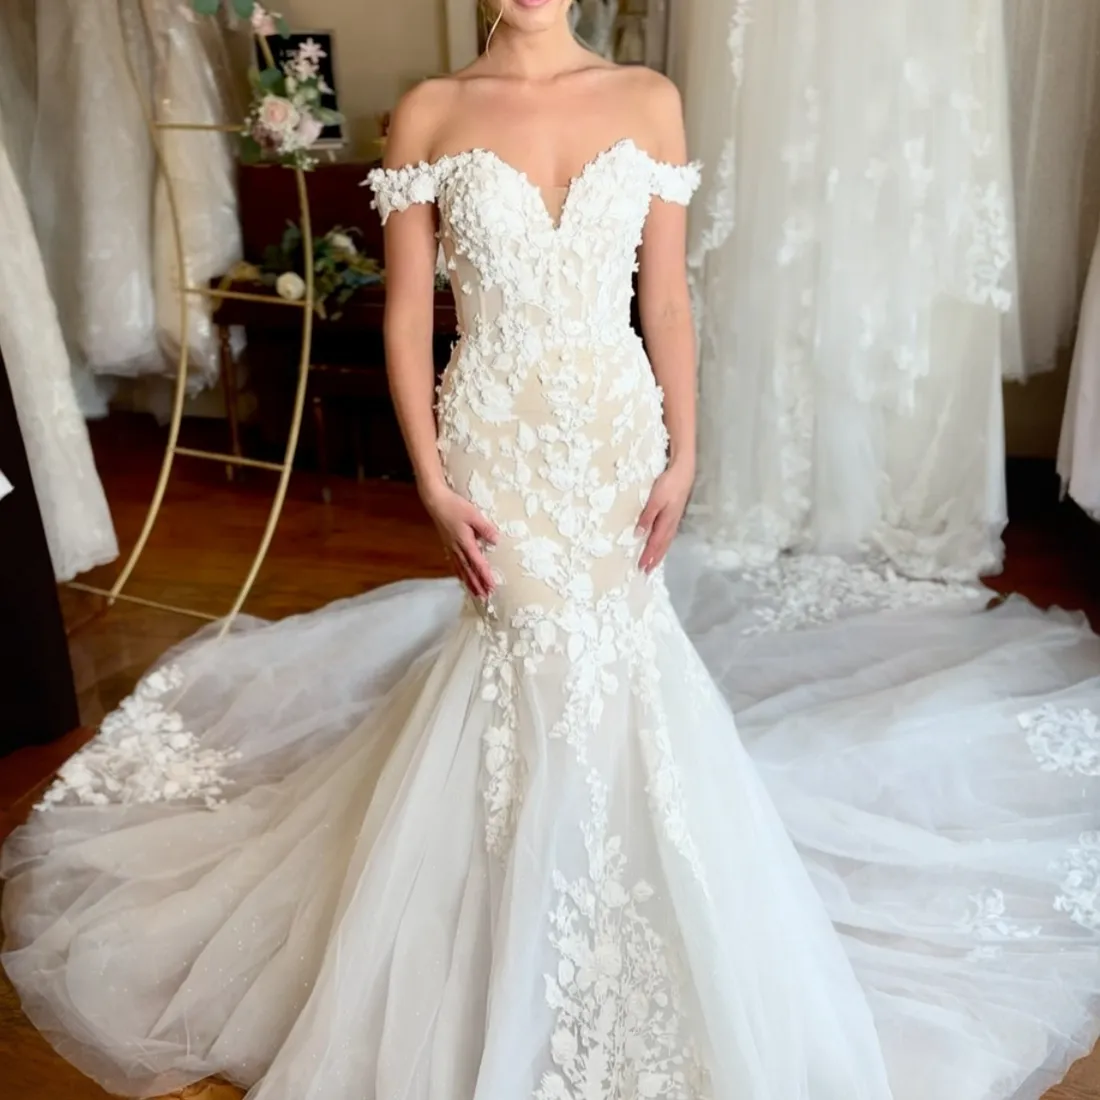 Mermaid Wedding Dress For Bride Illusion Off Shoulder Appliqued Lace Bridal  Gowns For Nigeria Black Women For Marriage Gorgeous Dresses Plus Size NW046  From Nuoweiman, $136.06 | DHgate.Com